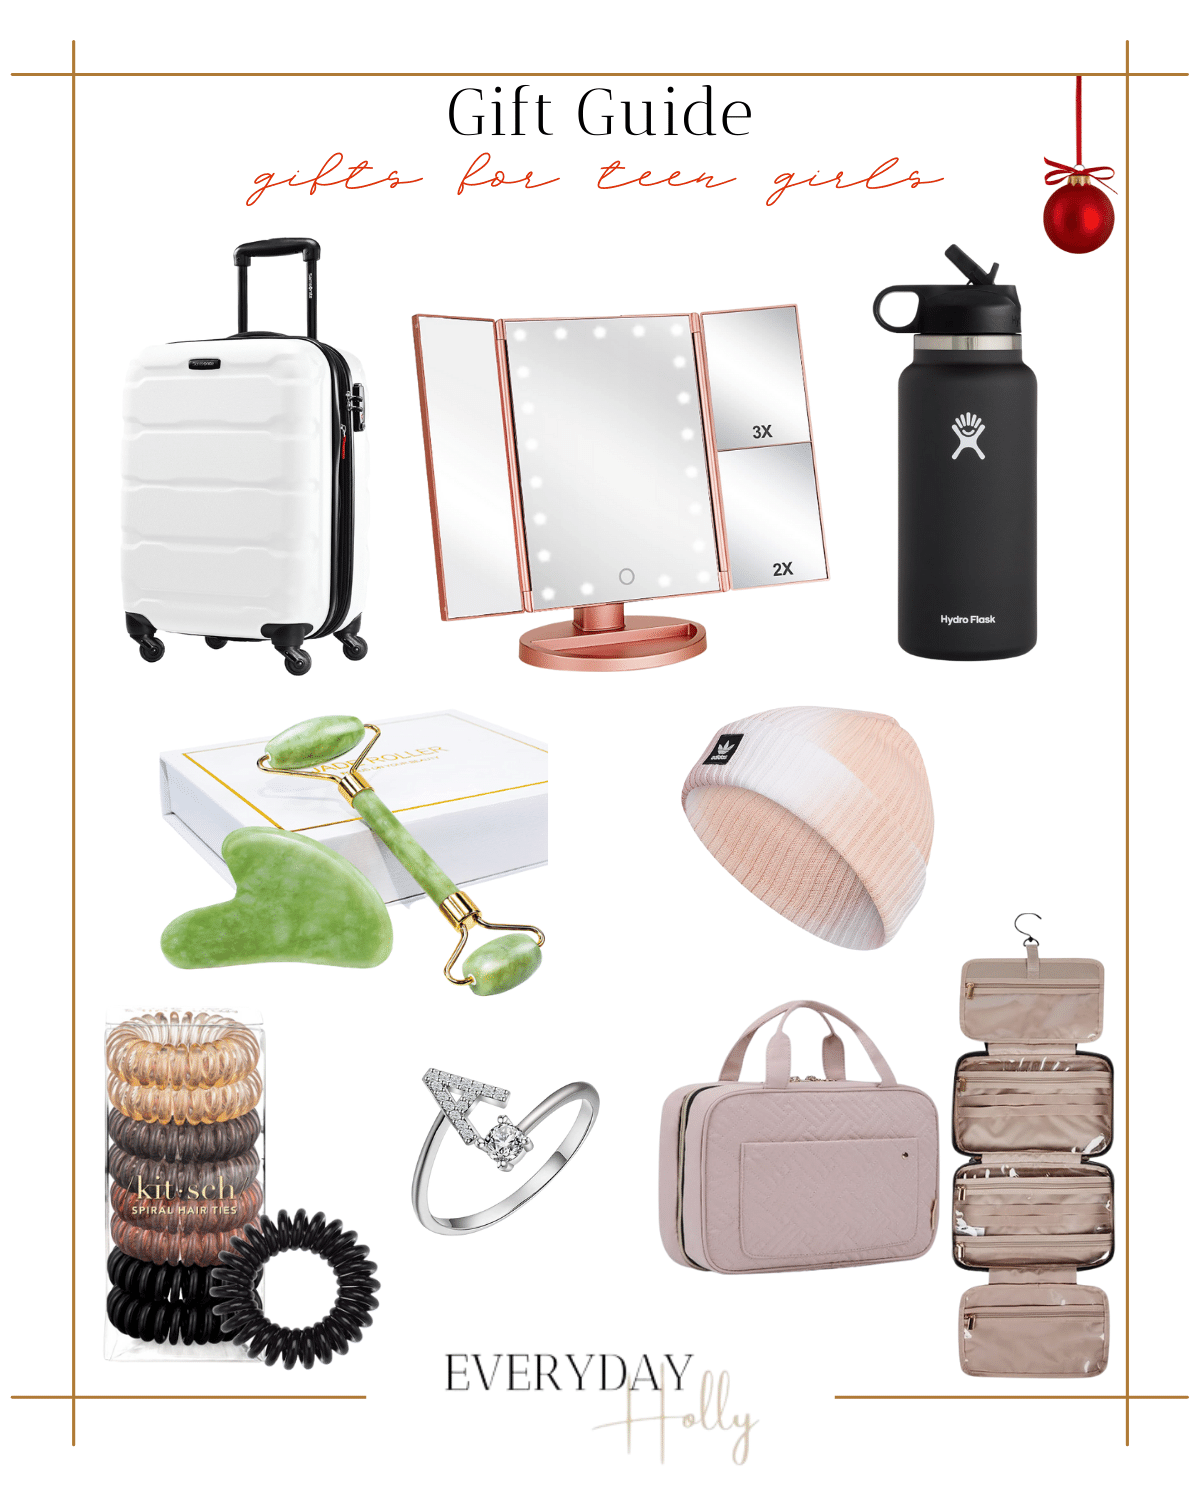 gifts for teen girls, christmas gift ideas, hardcase suitcase, makeup mirror, hydroflask, face roller & guasha, adidas beanie, hair ties, initial ring, travel makeup organizer 